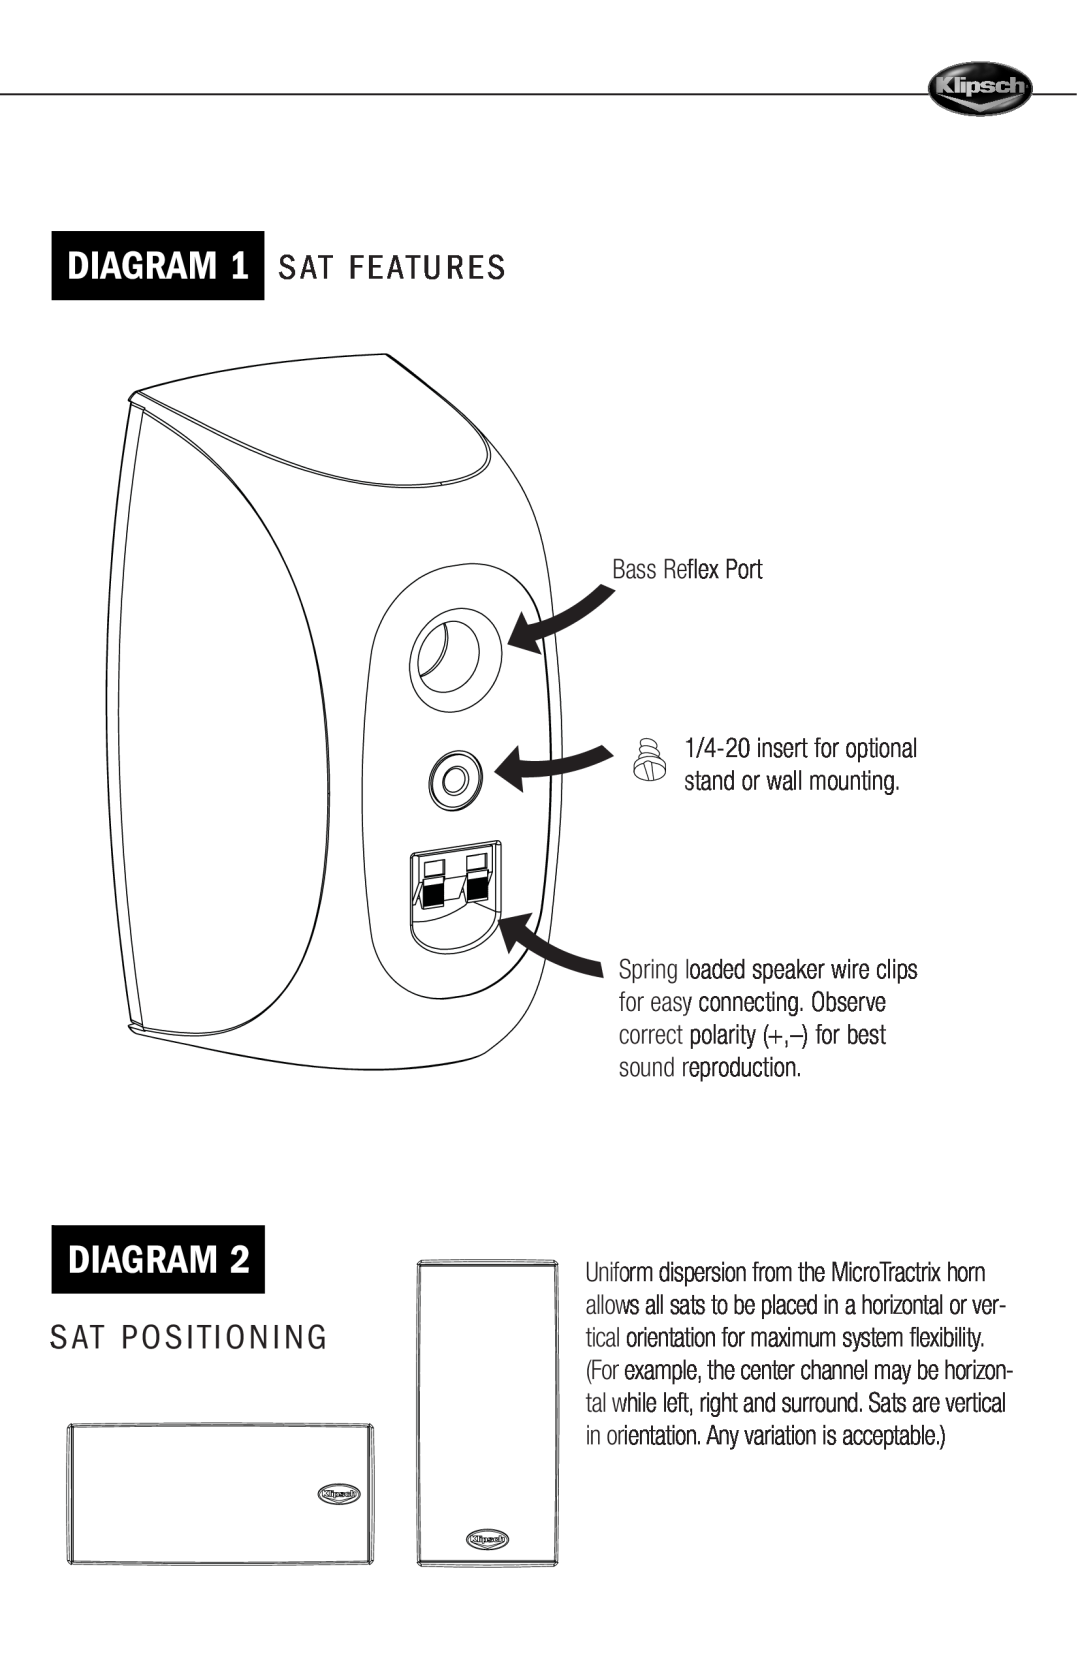 Klipsch 1000 Diagram, Sat Features, Sat Positioning, Bass Reflex Port, 1/4-20insert for optional stand or wall mounting 